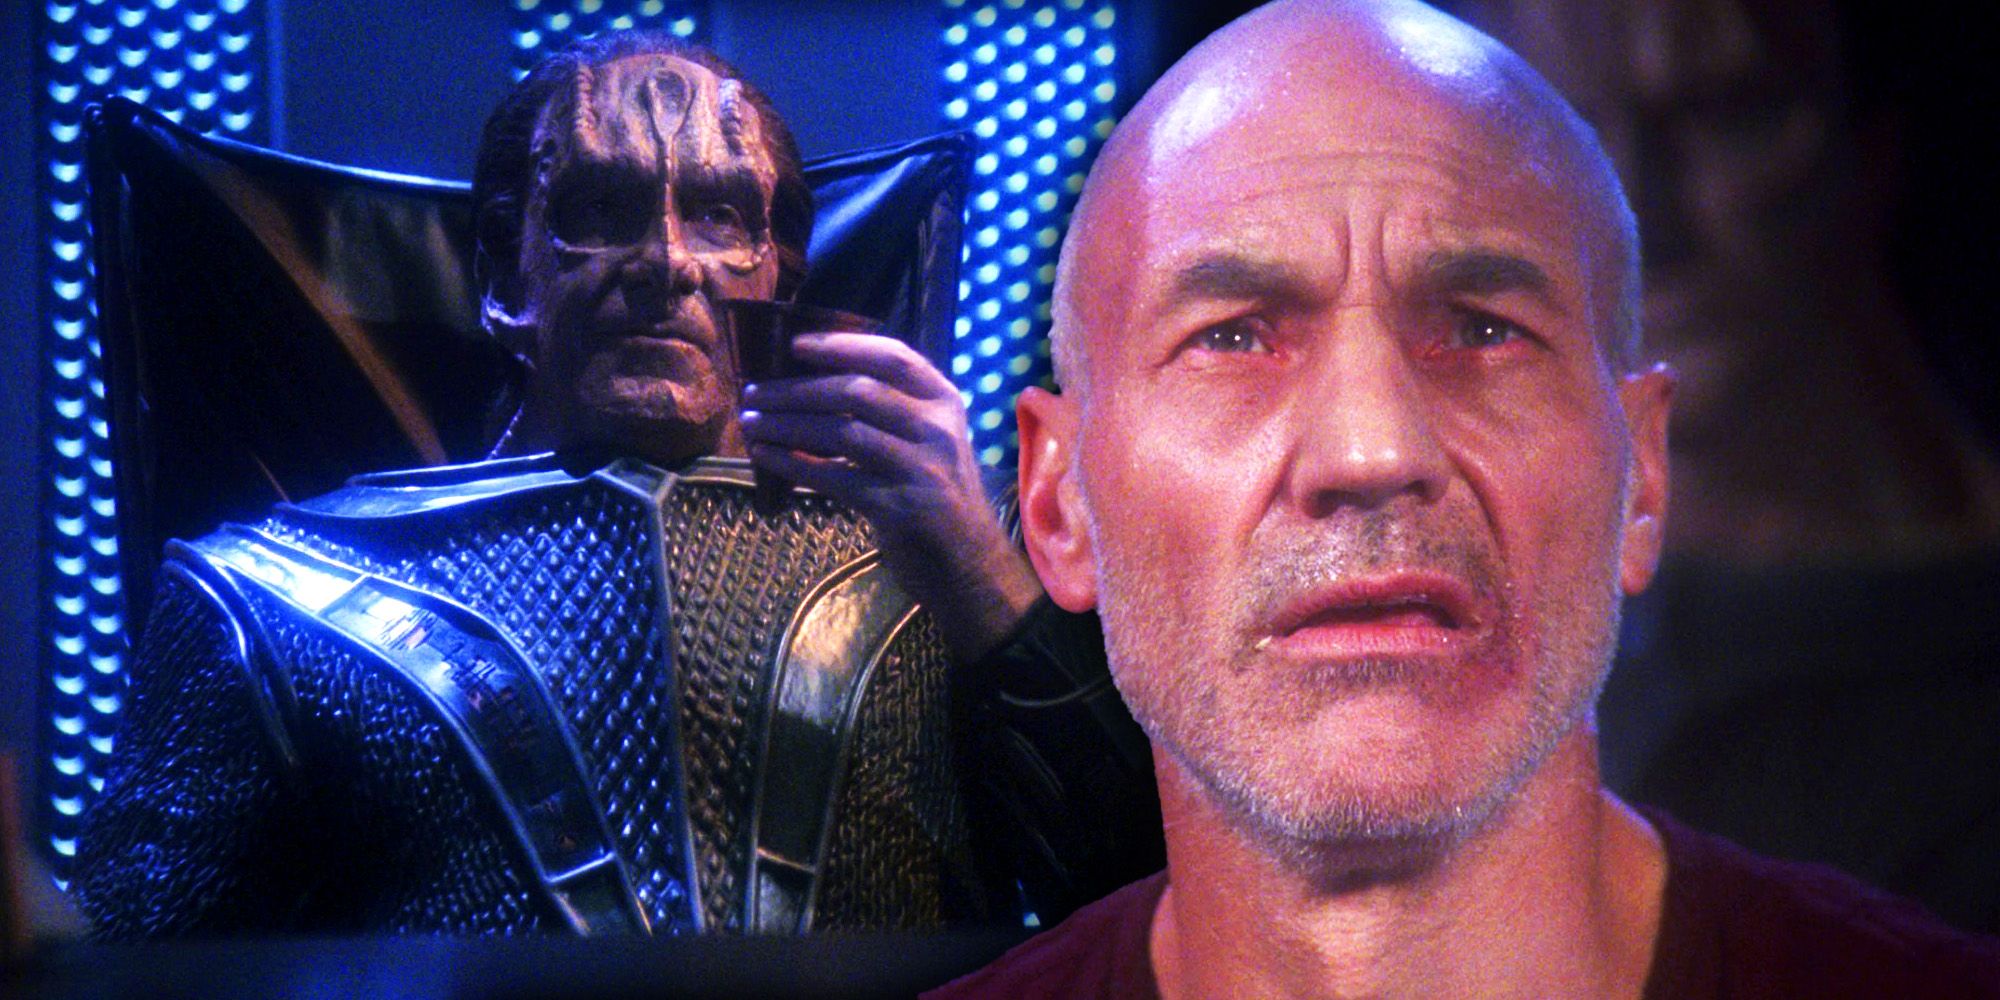 David Warner as Gul Madred sits with a cup while Patrick Stewart as Picard looks haggard in the Star Trek: The Next Generation episode 